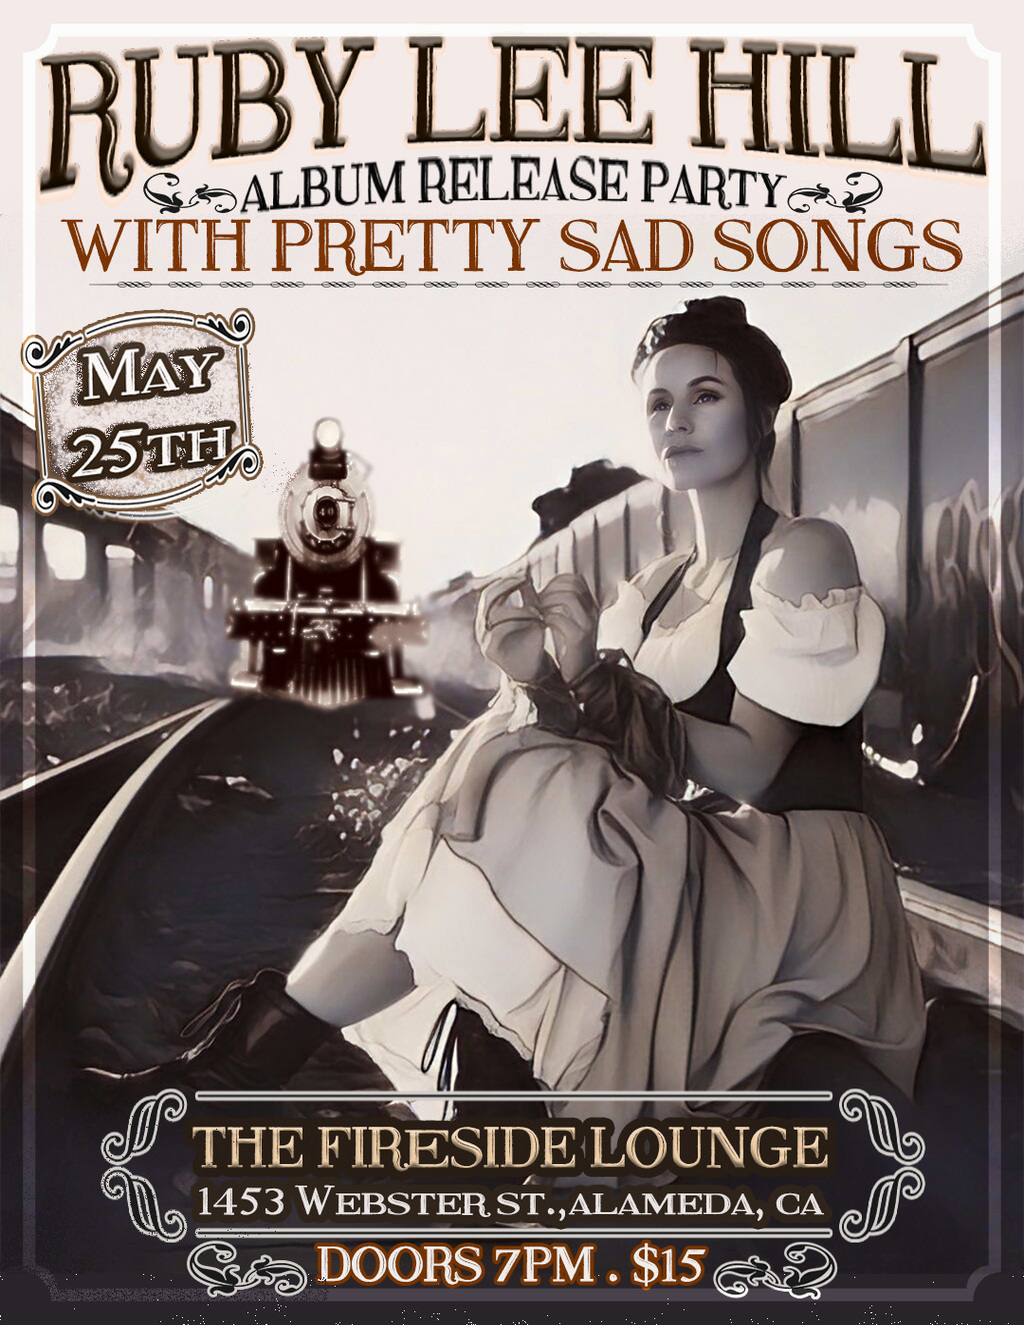 The Fireside Lounge RUBY LEE HILL S ALBUM RELEASE PARTY WITH PRETTY SAD SONGS promotion flier on Digifli com